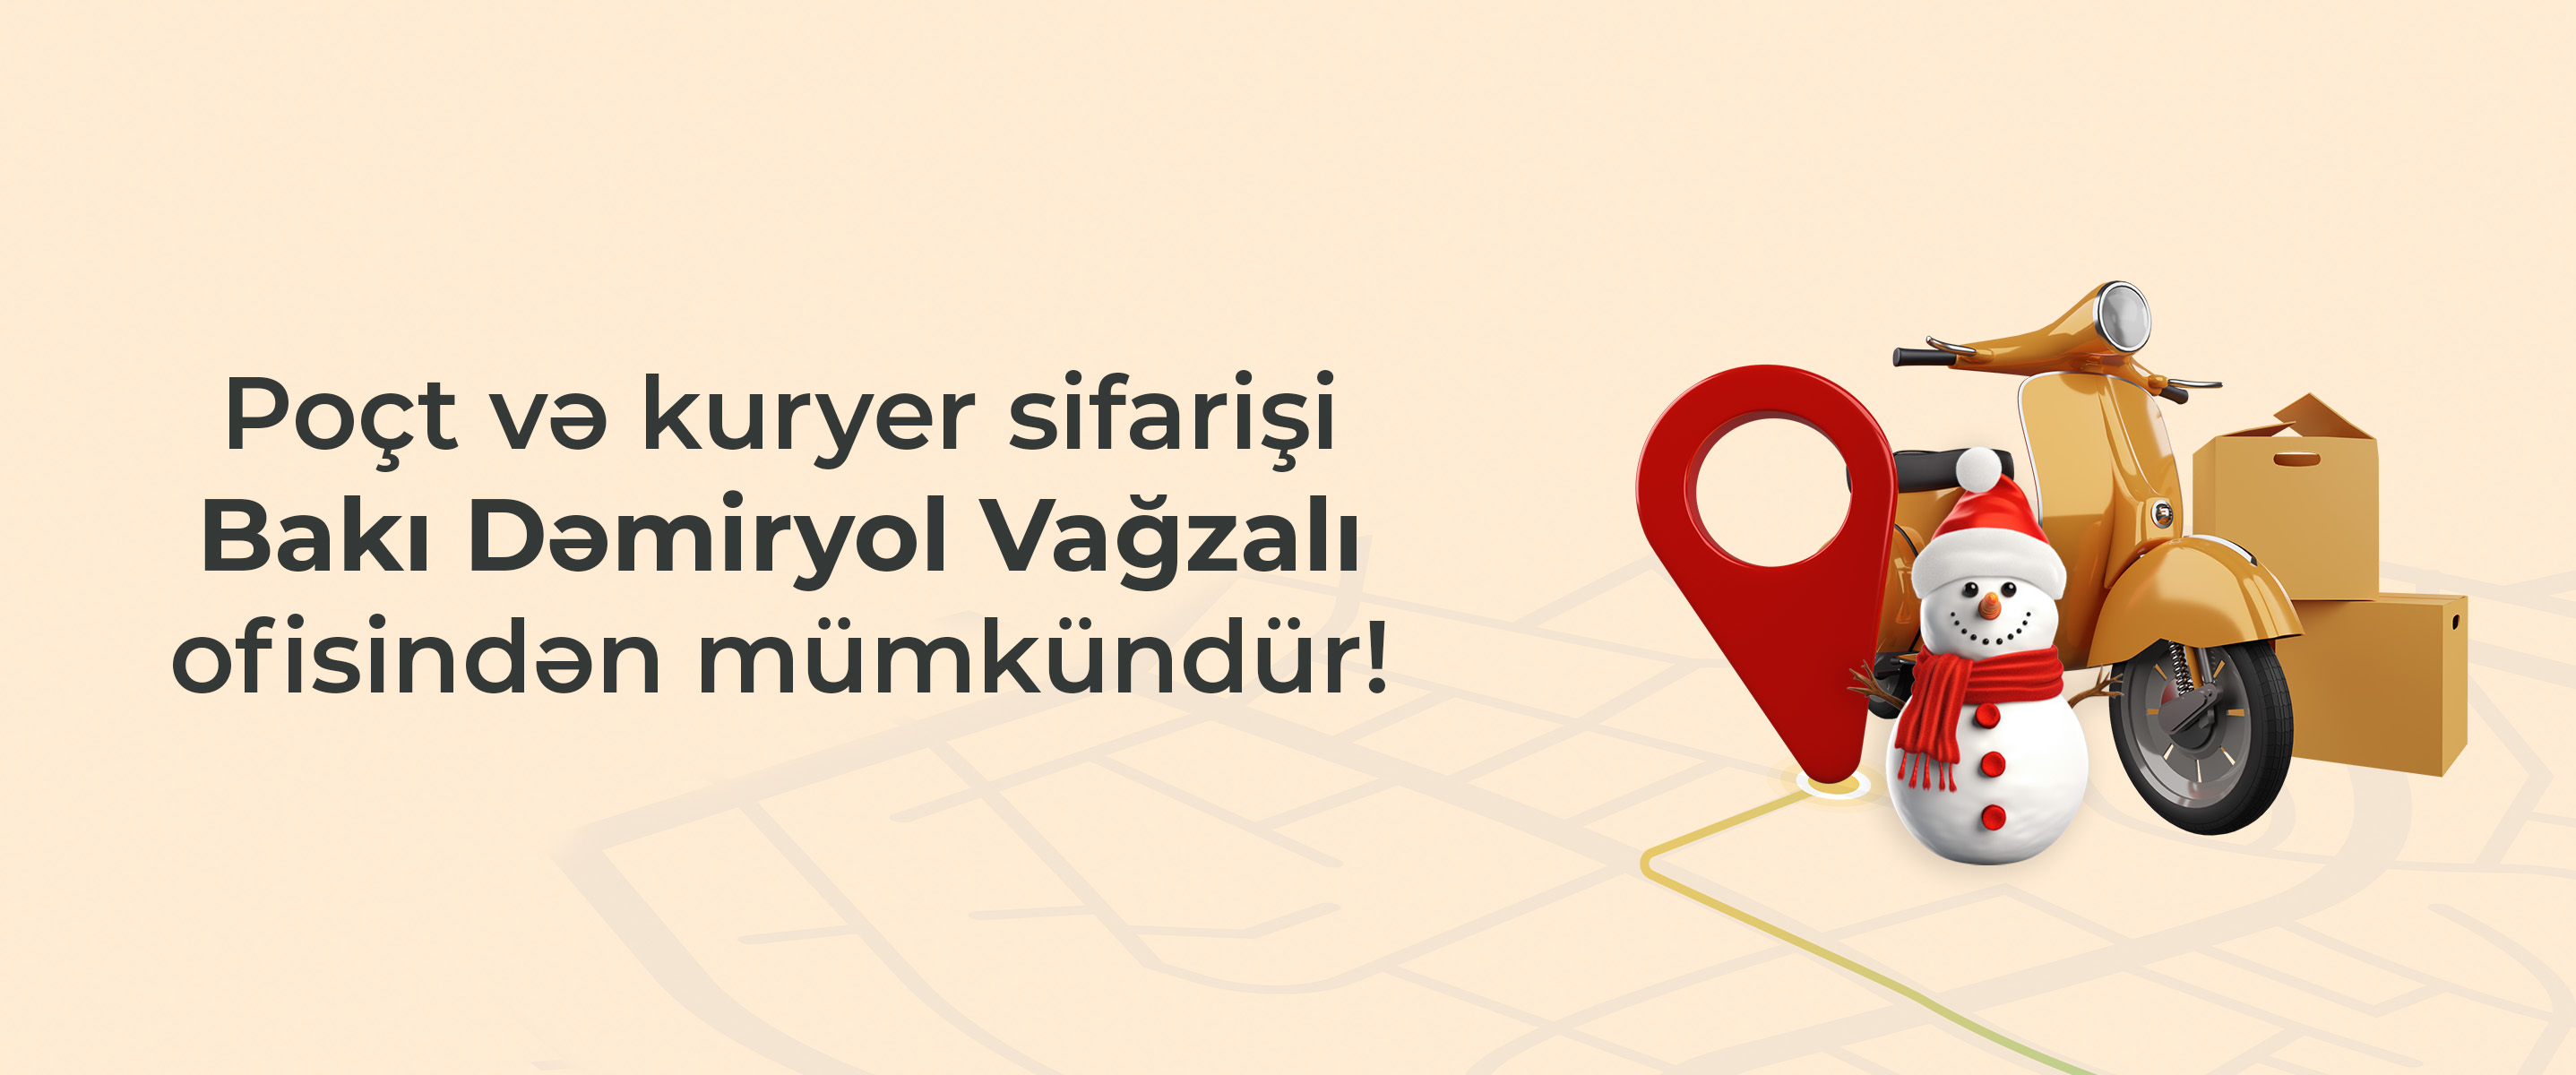 Mail and courier orders are possible from Baku Railway Station office!